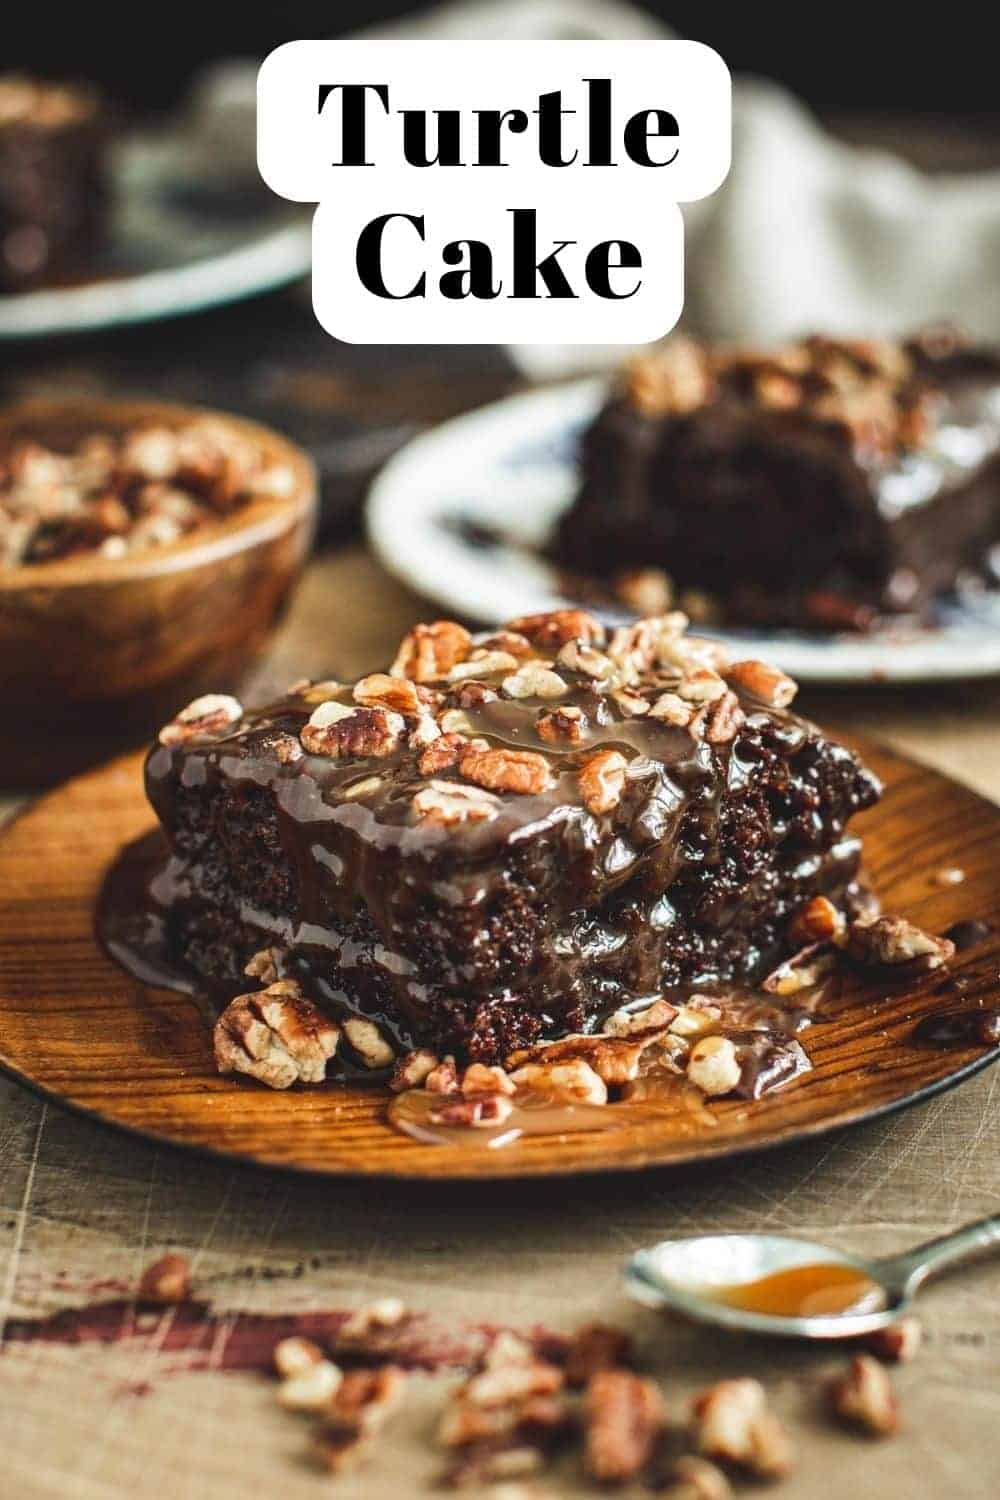 Chocolate turtle cake topped with chopped pecans on a wooden plate.